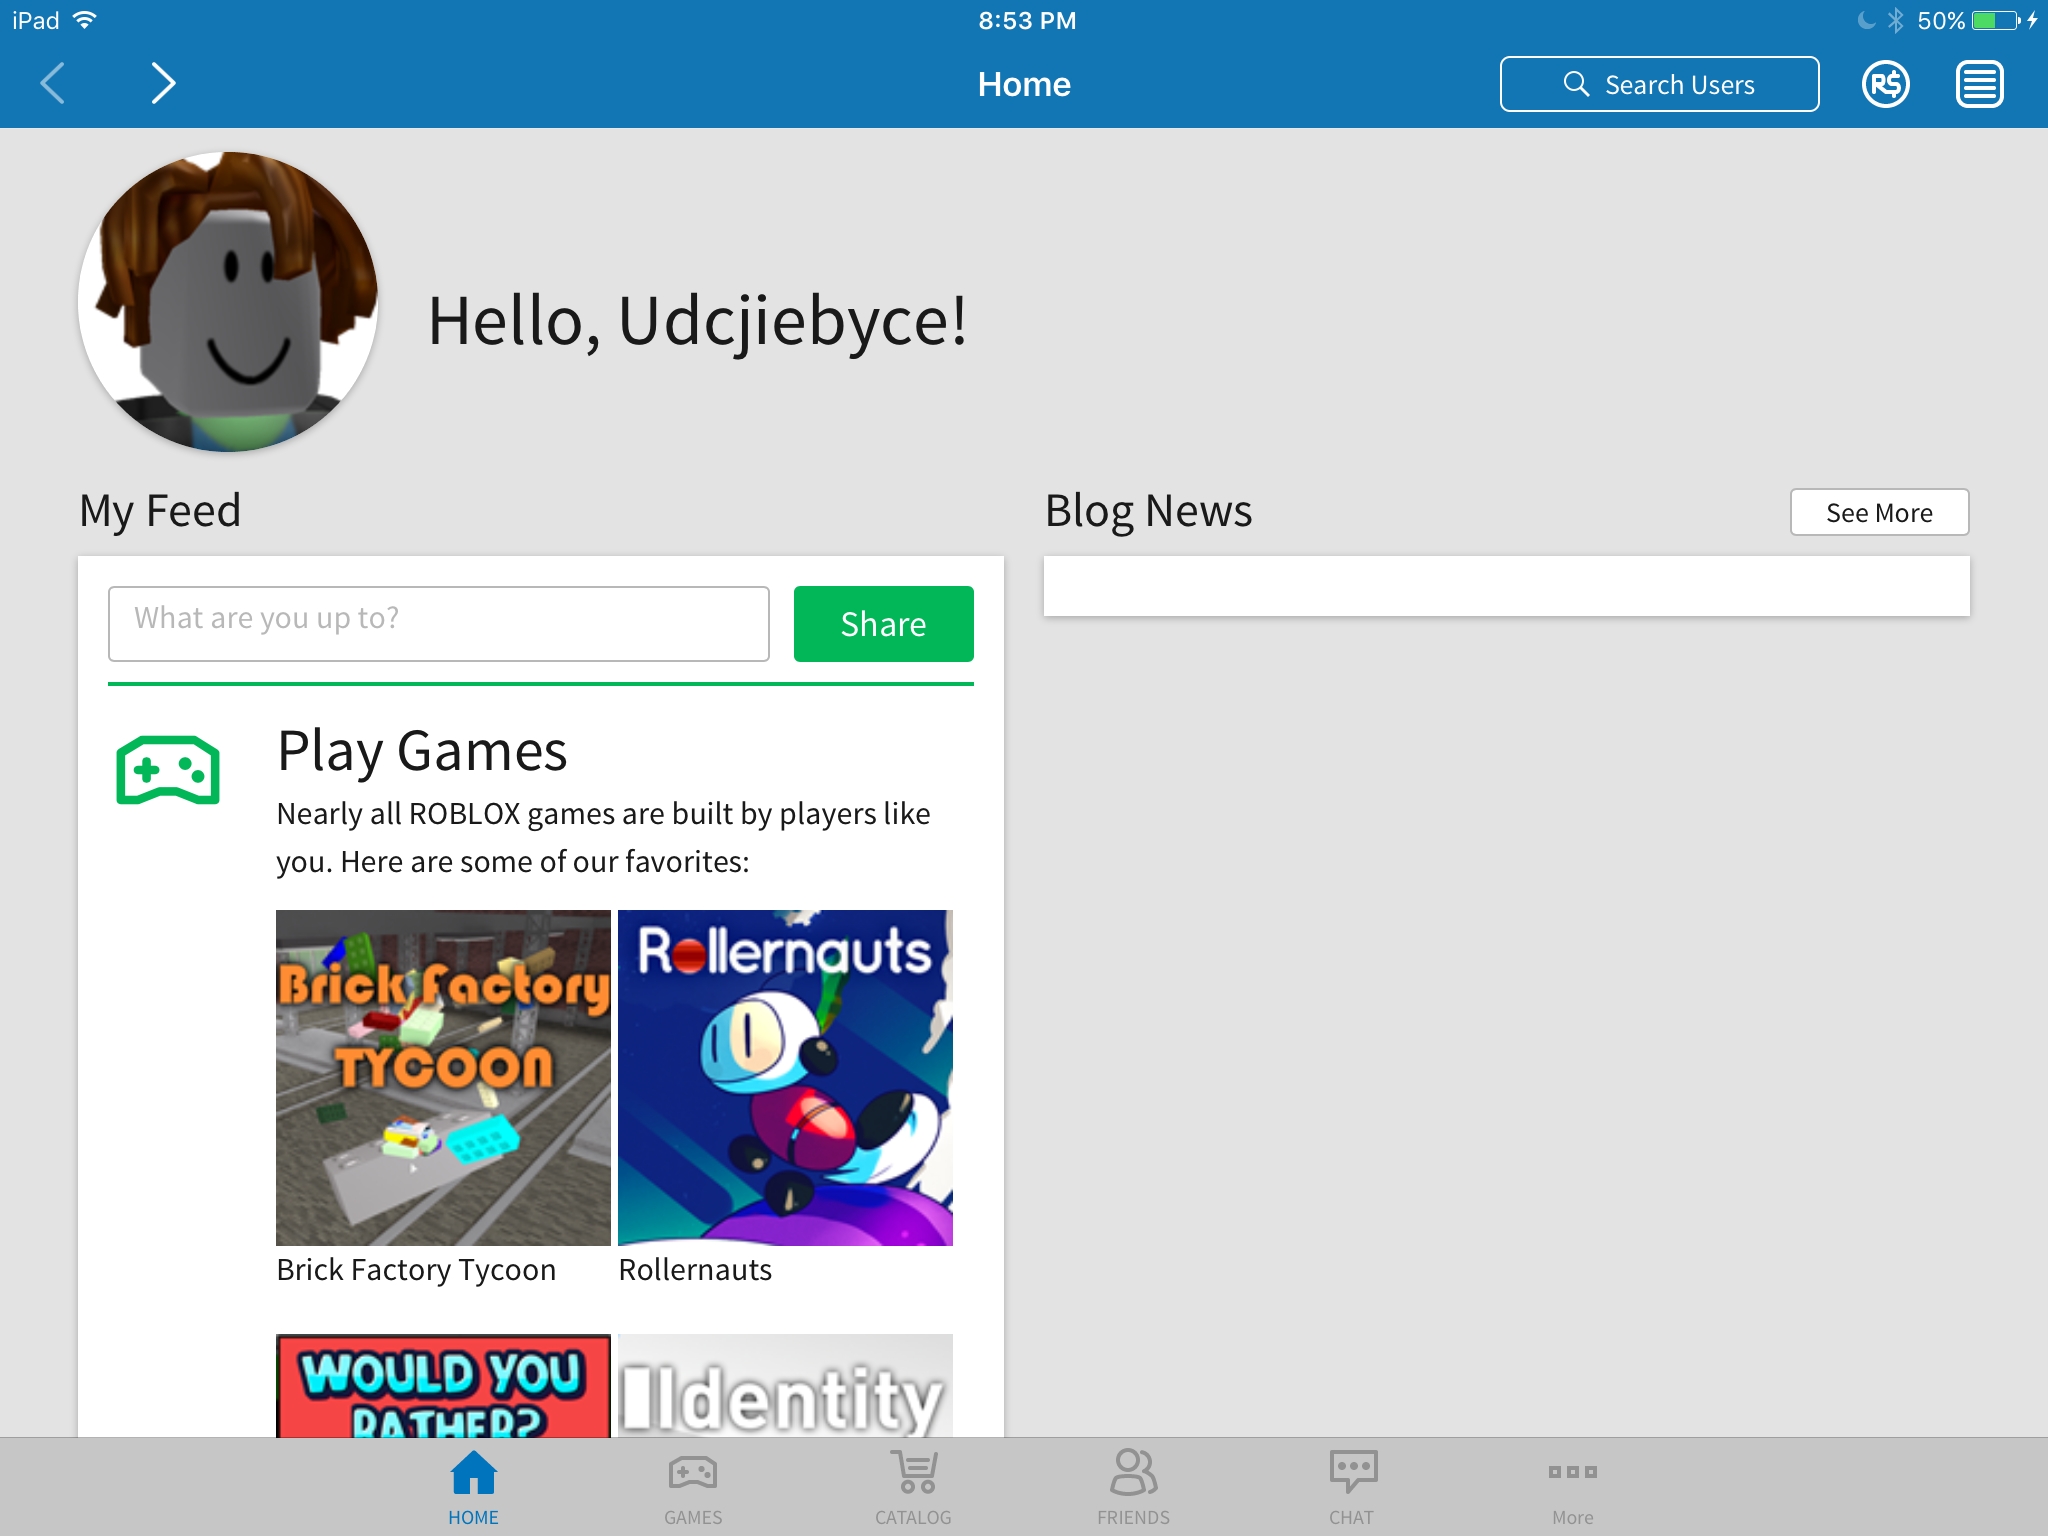 Roblox Banned For Hacking